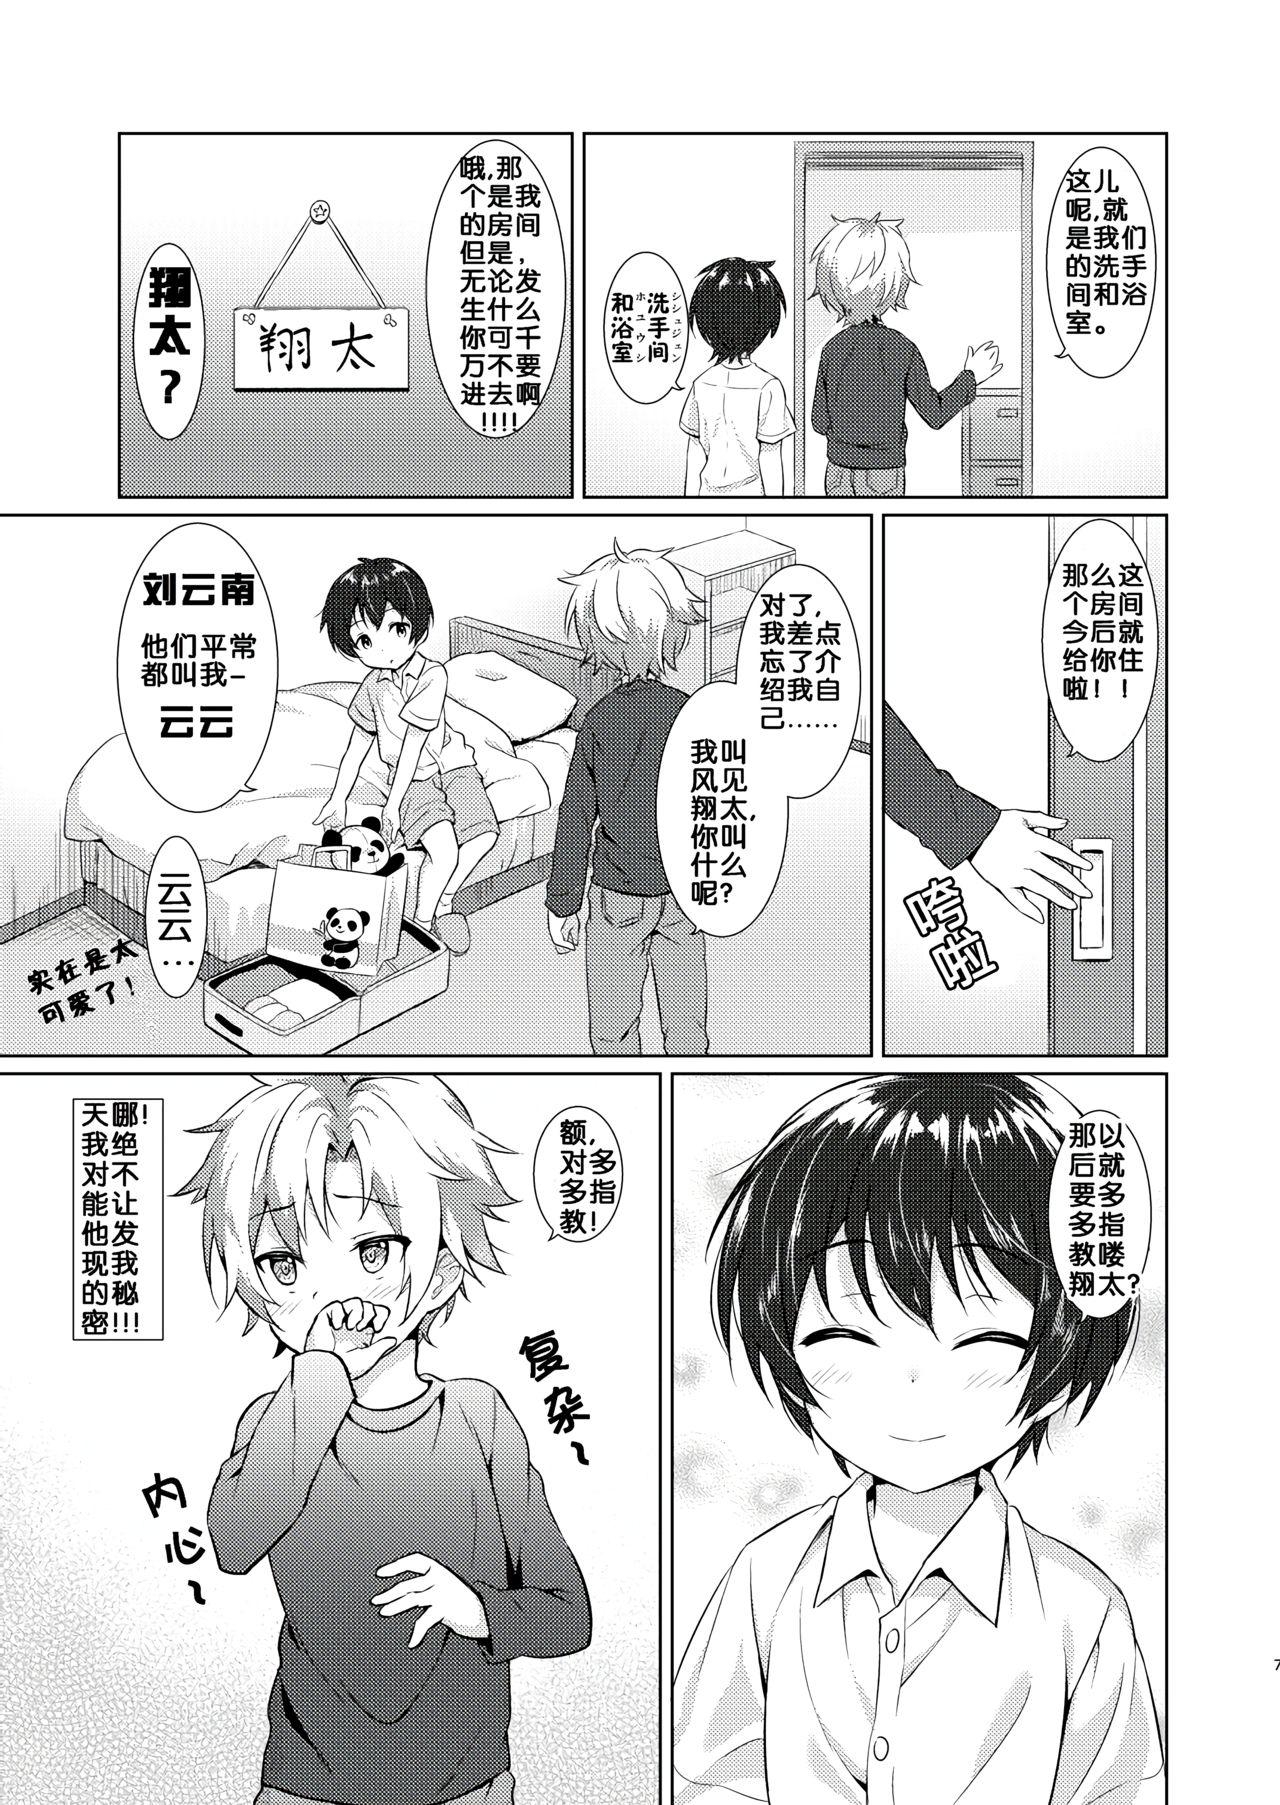 Perfect Butt [Commamion (Numa)] Ibunka Room Sharing - Cross-Cultural Room Sharing [Chinese] [Decensored] [Digital] - Original Chica - Page 5